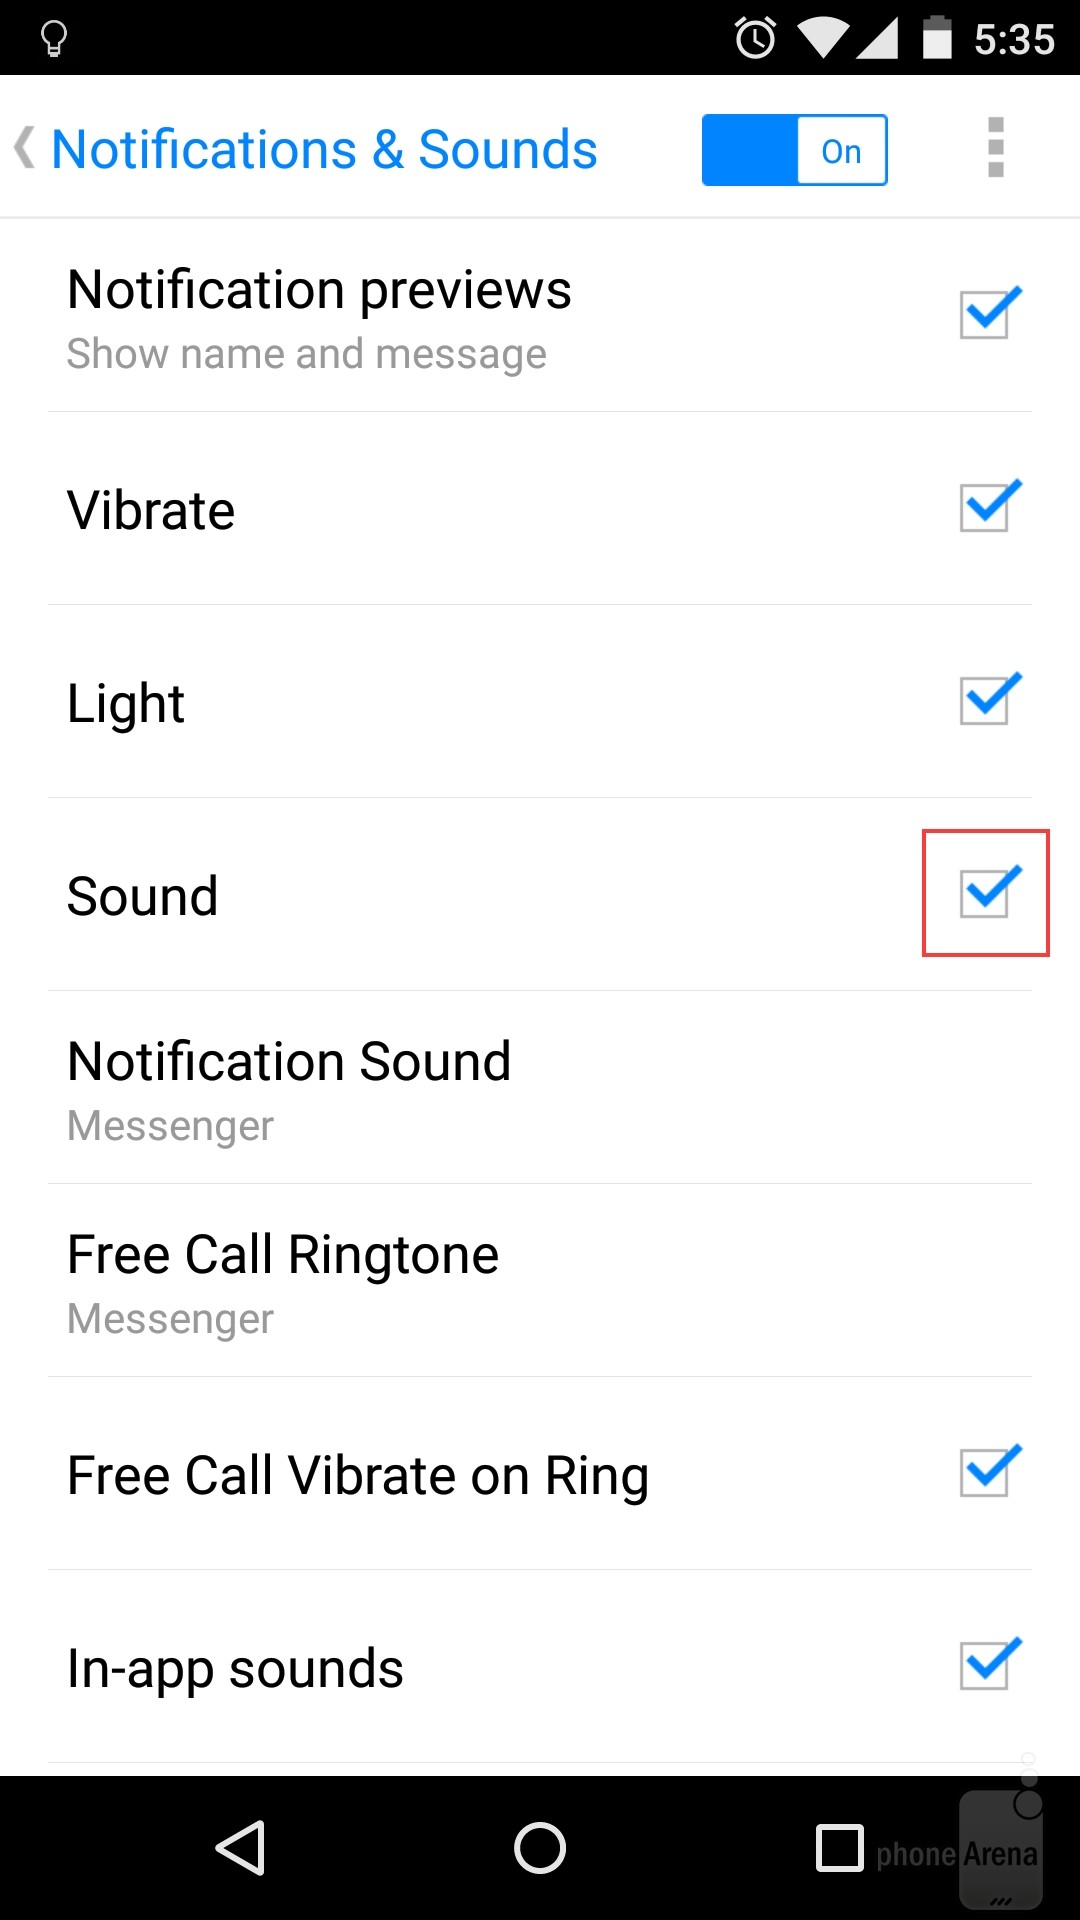 Next-deselect-the-Sound-checkbox-and-thats-it---no-more-notification-sounds-from-your-Facebook-Messenger-app.